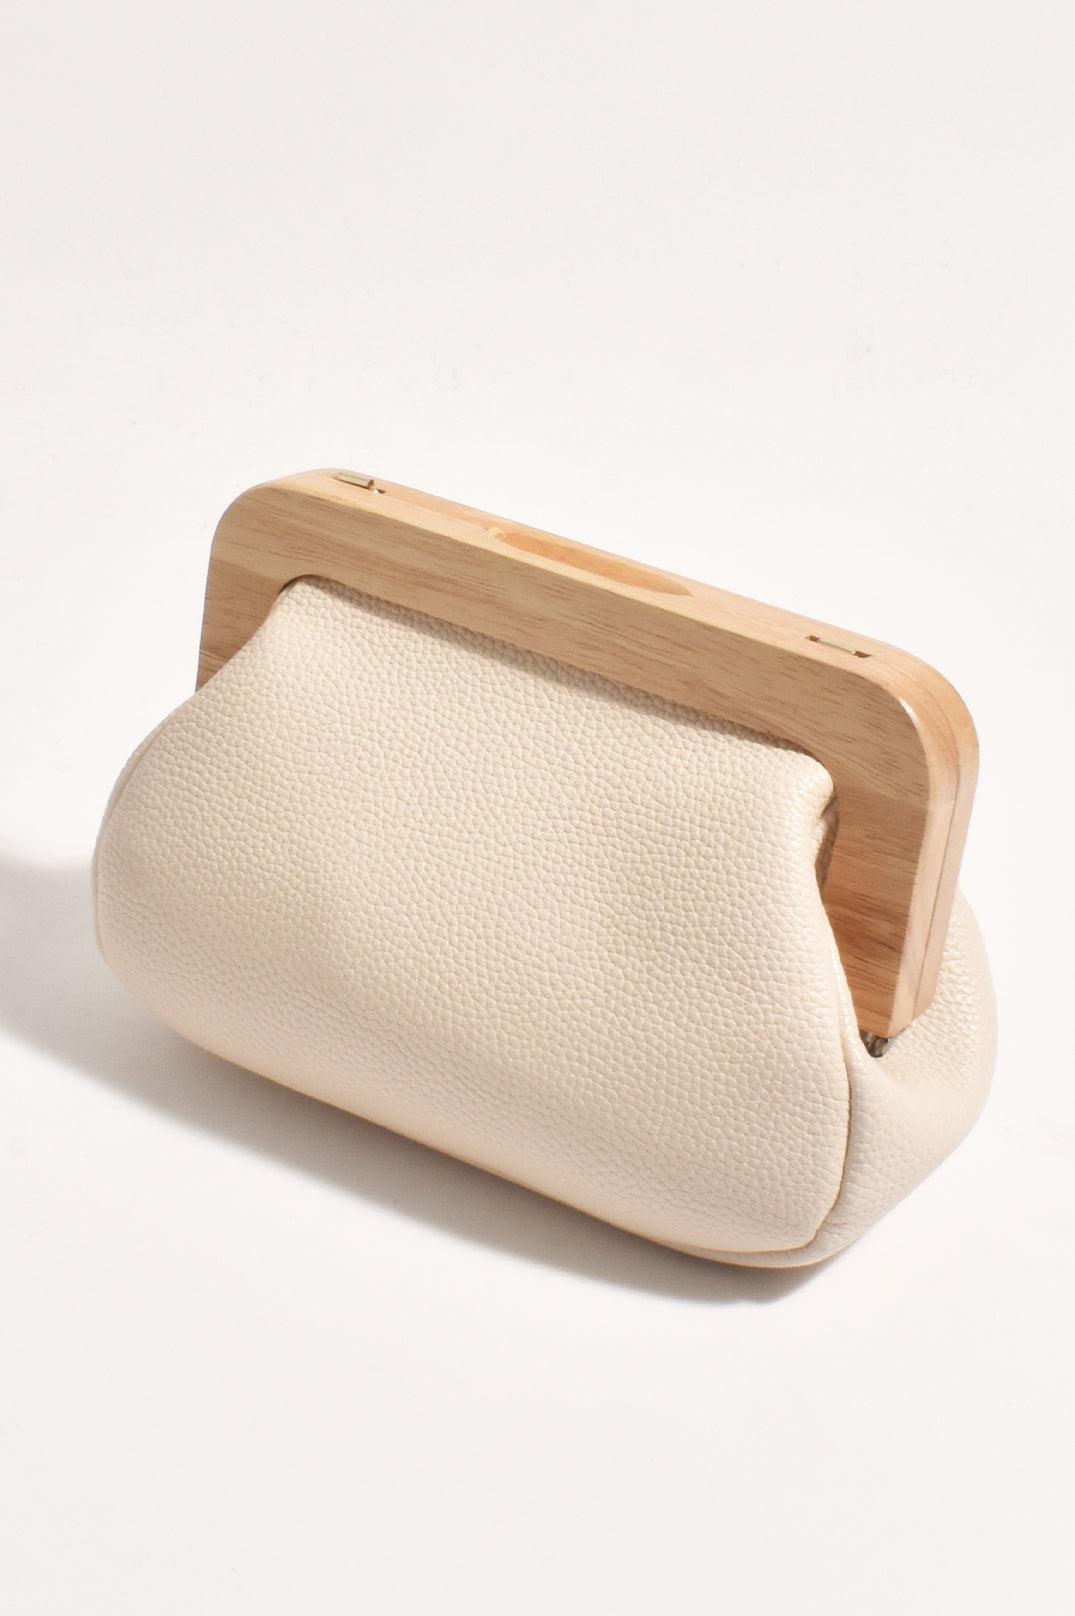 Kimmi Timber Frame Clutch - Nude-Bags & Clutches-Adorne-The Bay Room